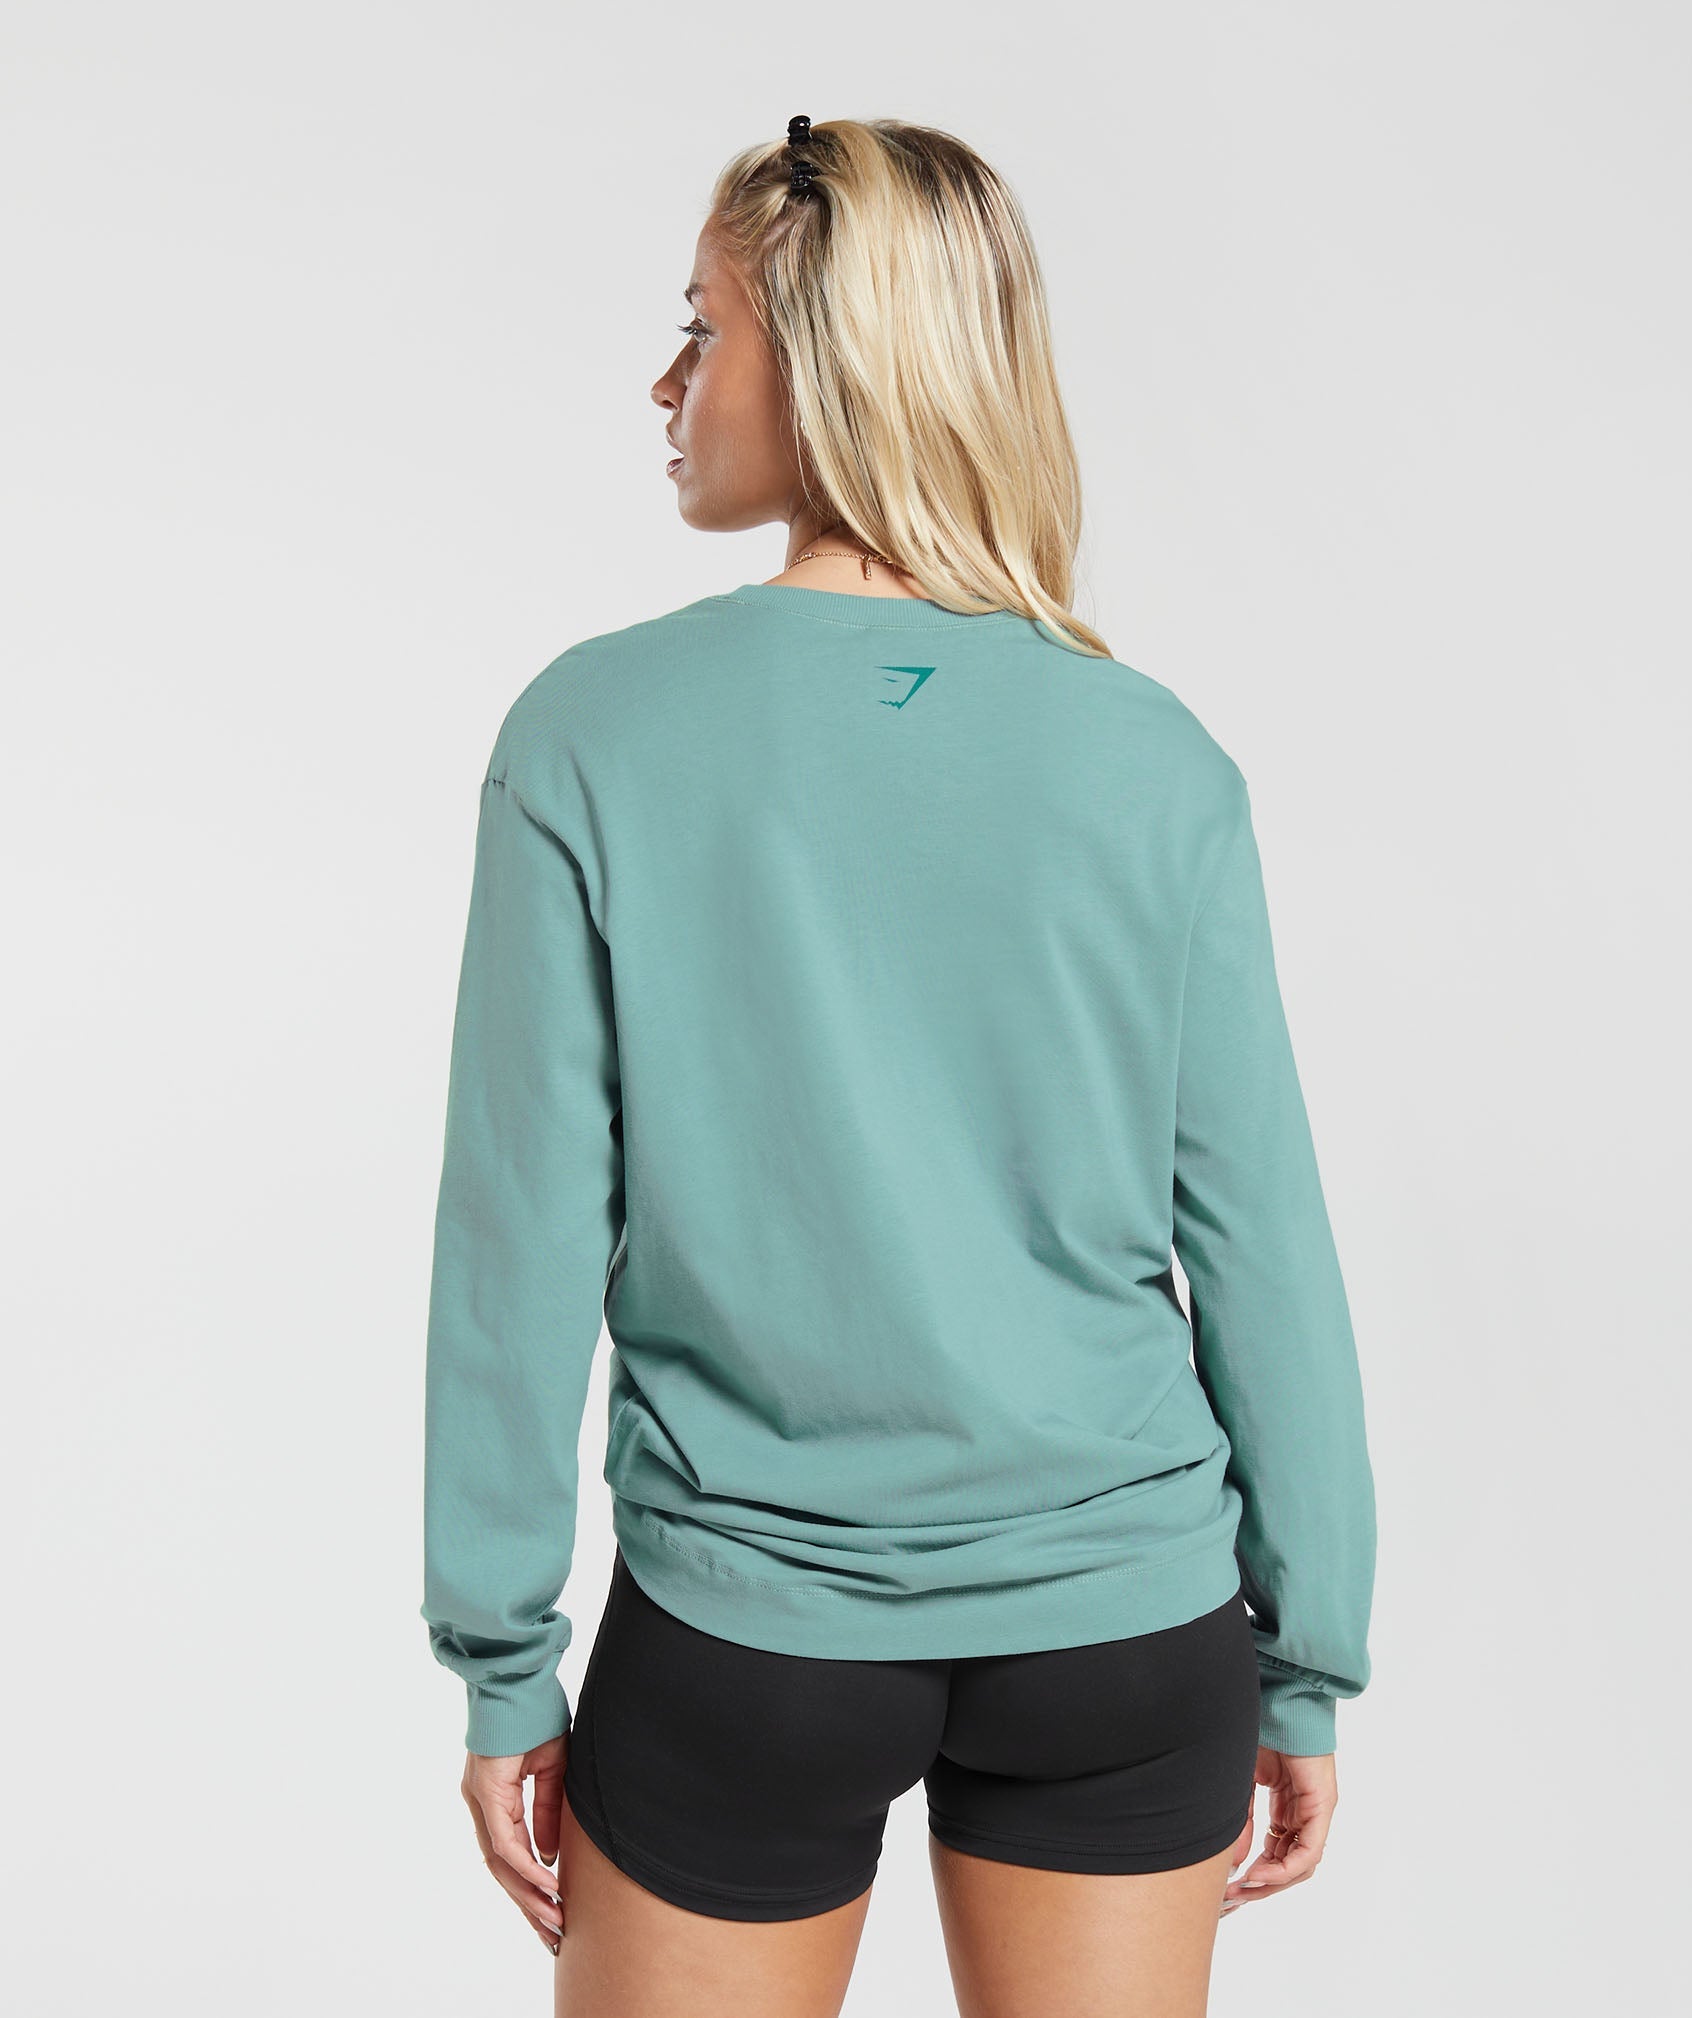 Cherub Graphic Long Sleeve Top in Duck Egg Blue - view 2